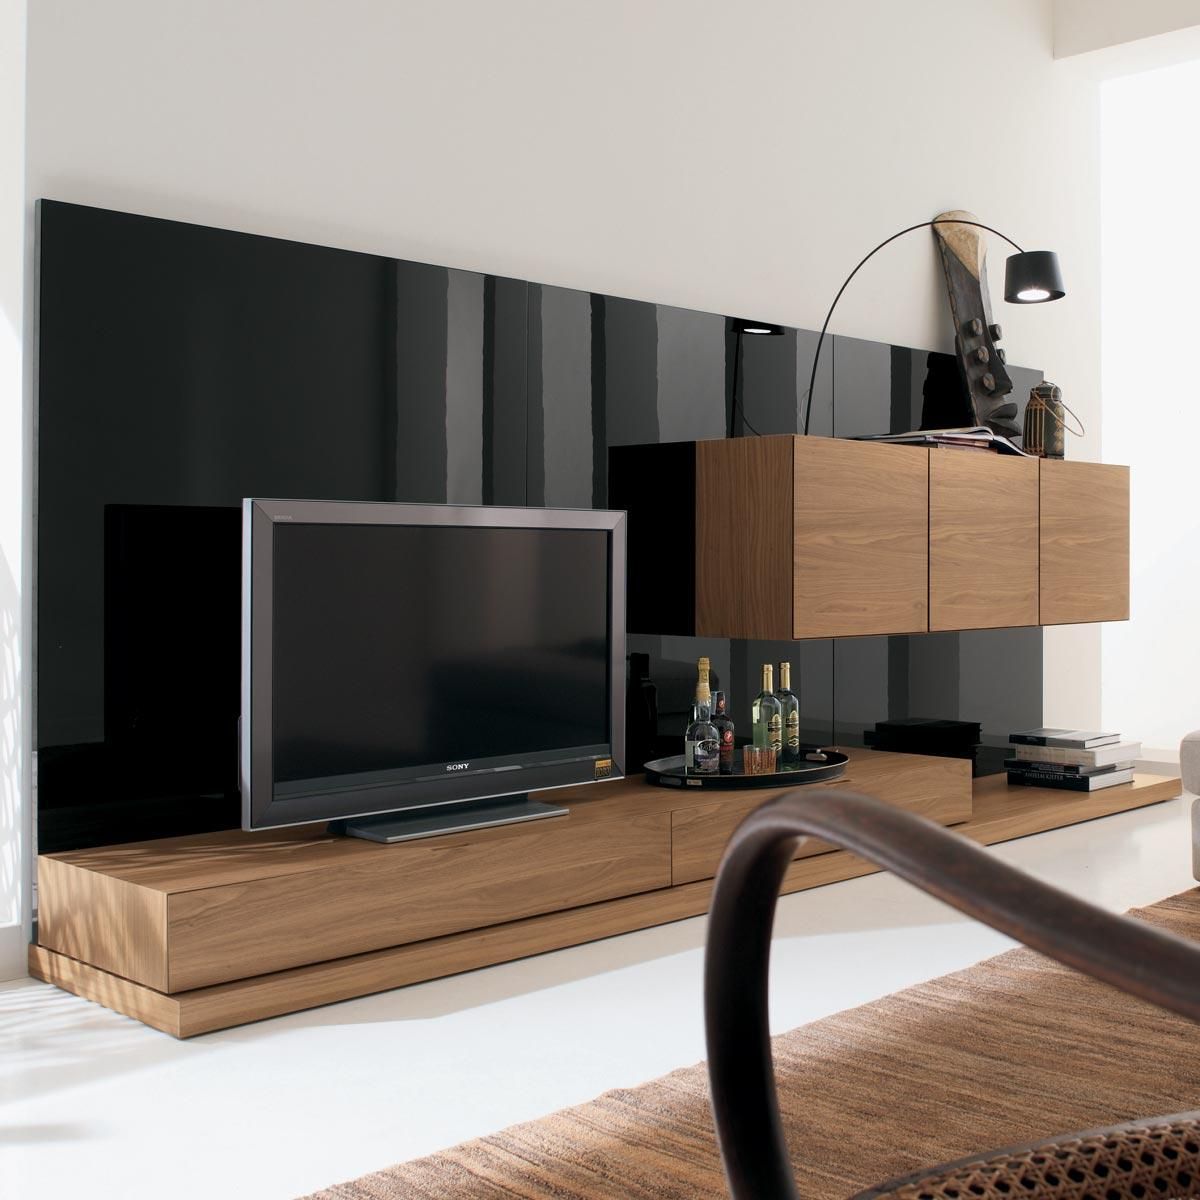 Solid Wood Tv Stand Also Long Tv Stand And Black Wall Pertaining To Long White Tv Stands (View 8 of 15)